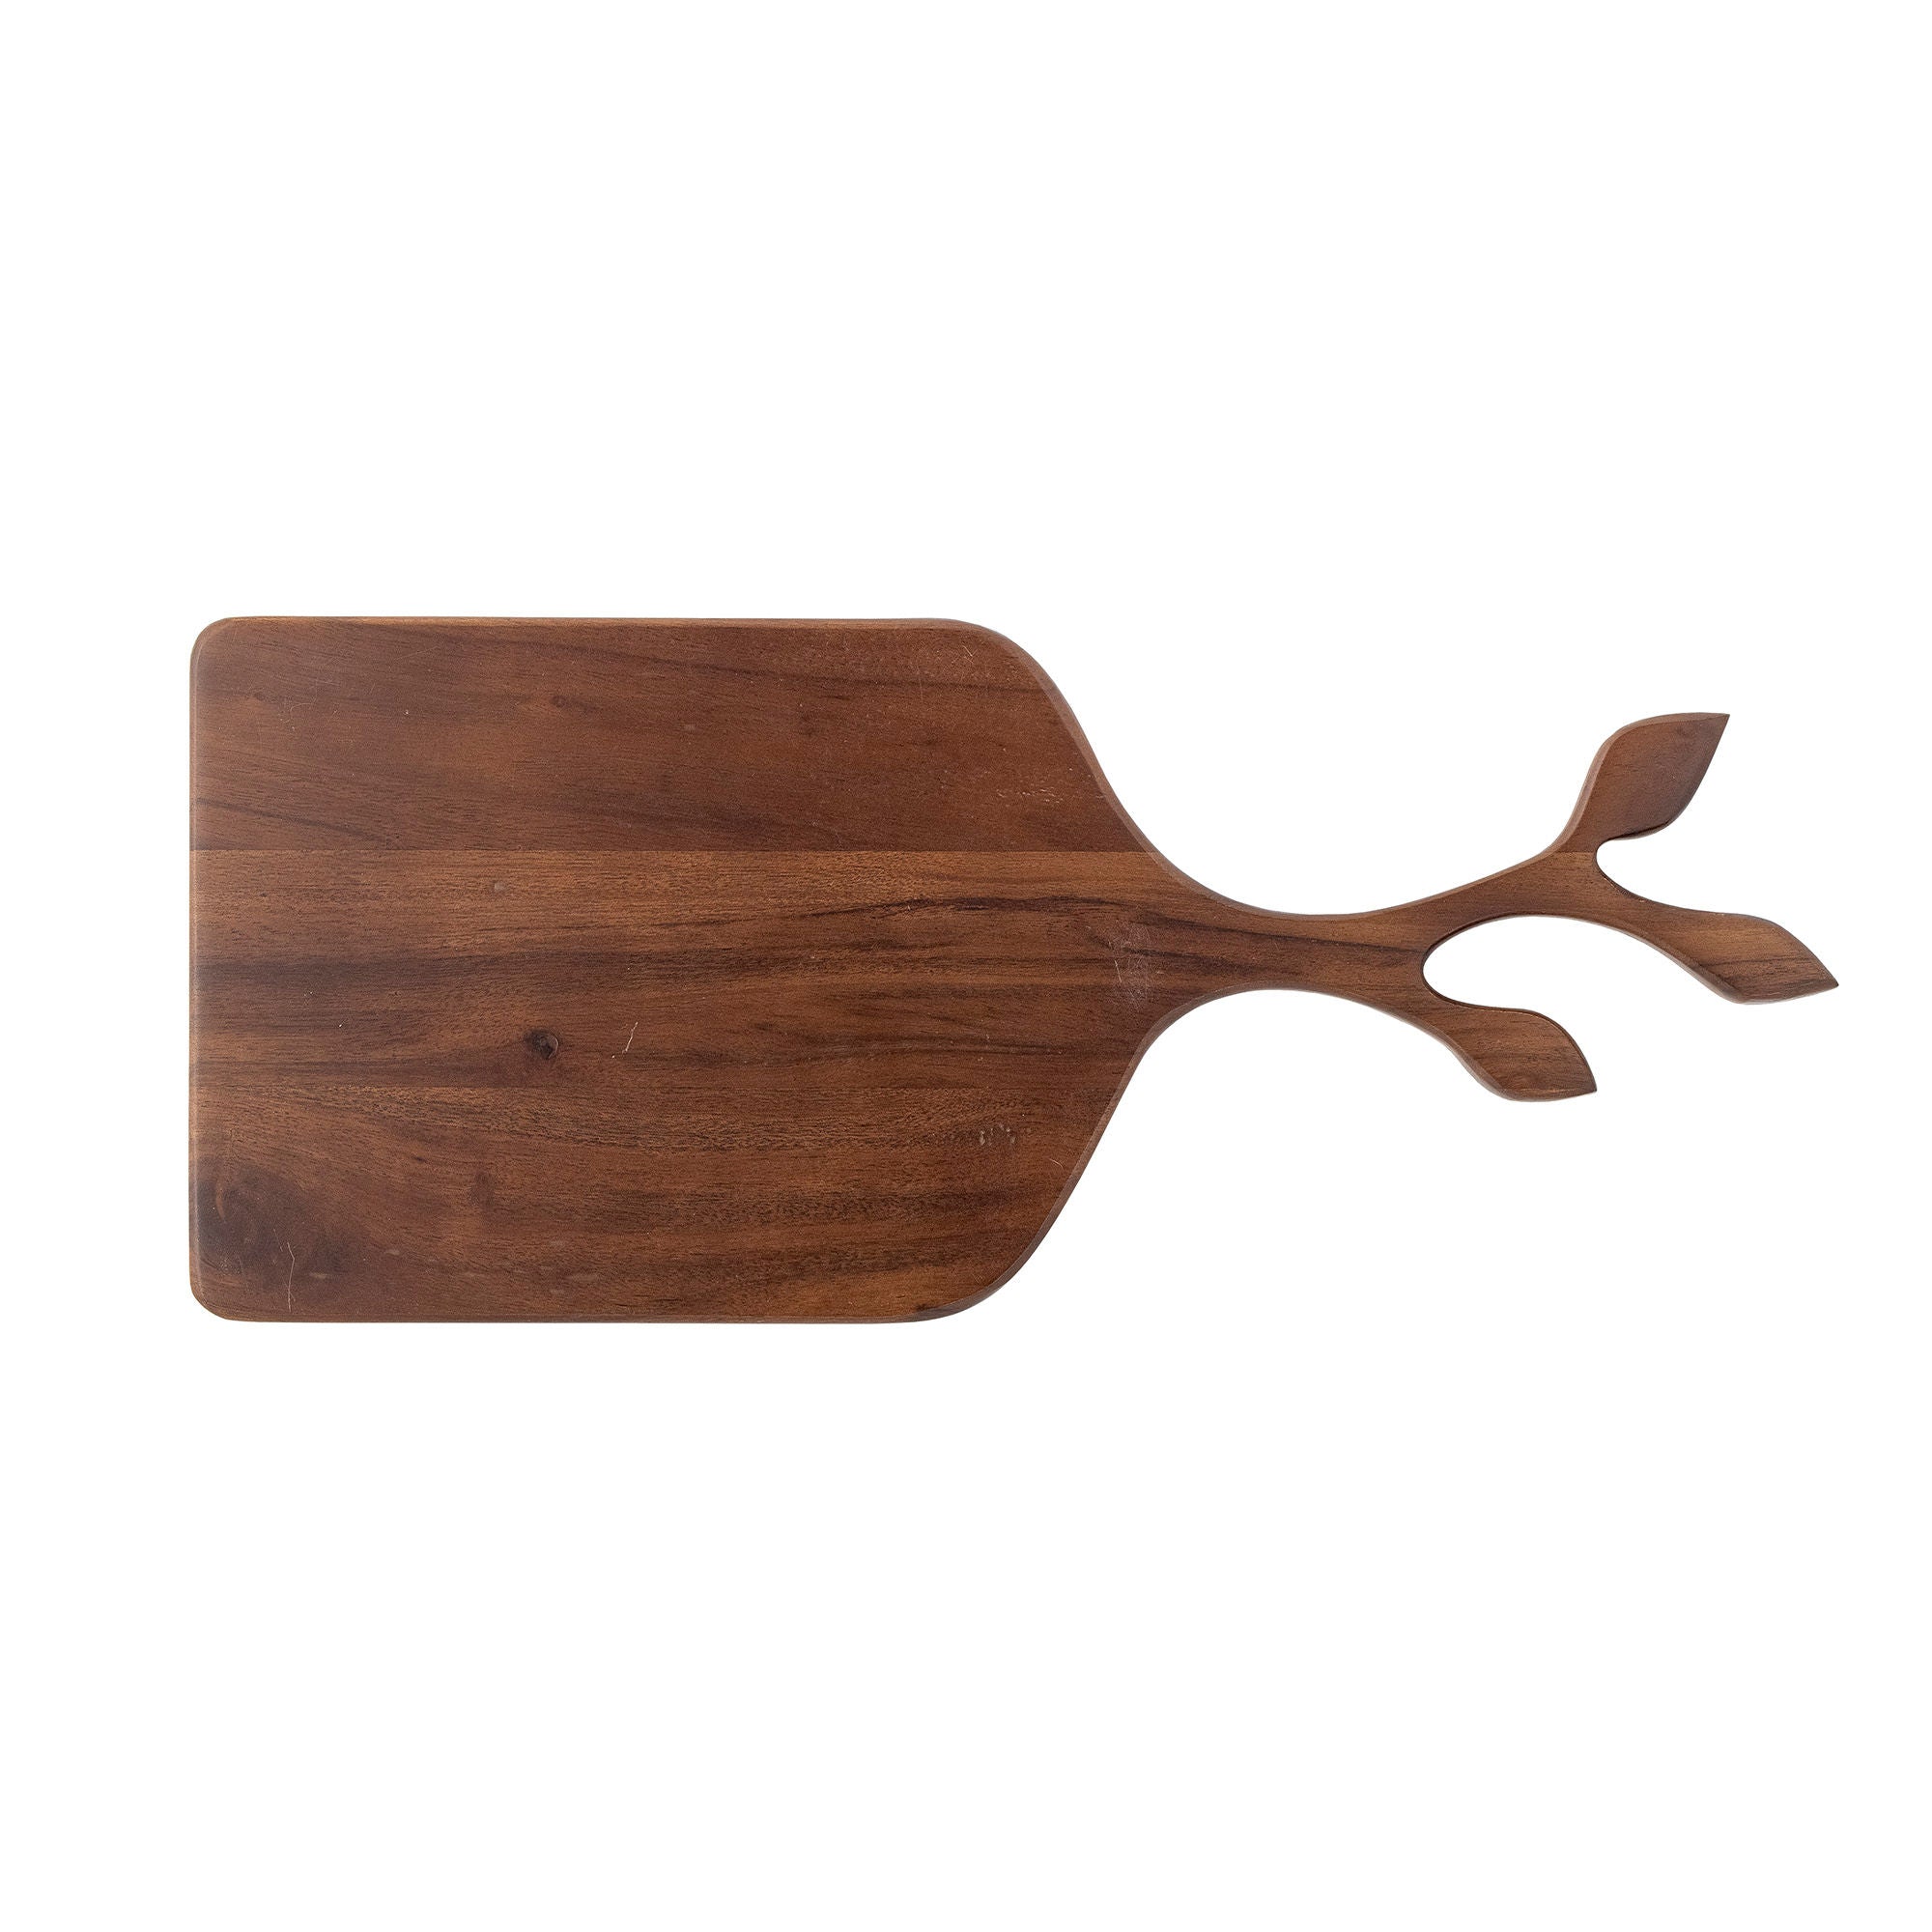 Bloomingville Giselle Cutting Board, Brown, Acacia